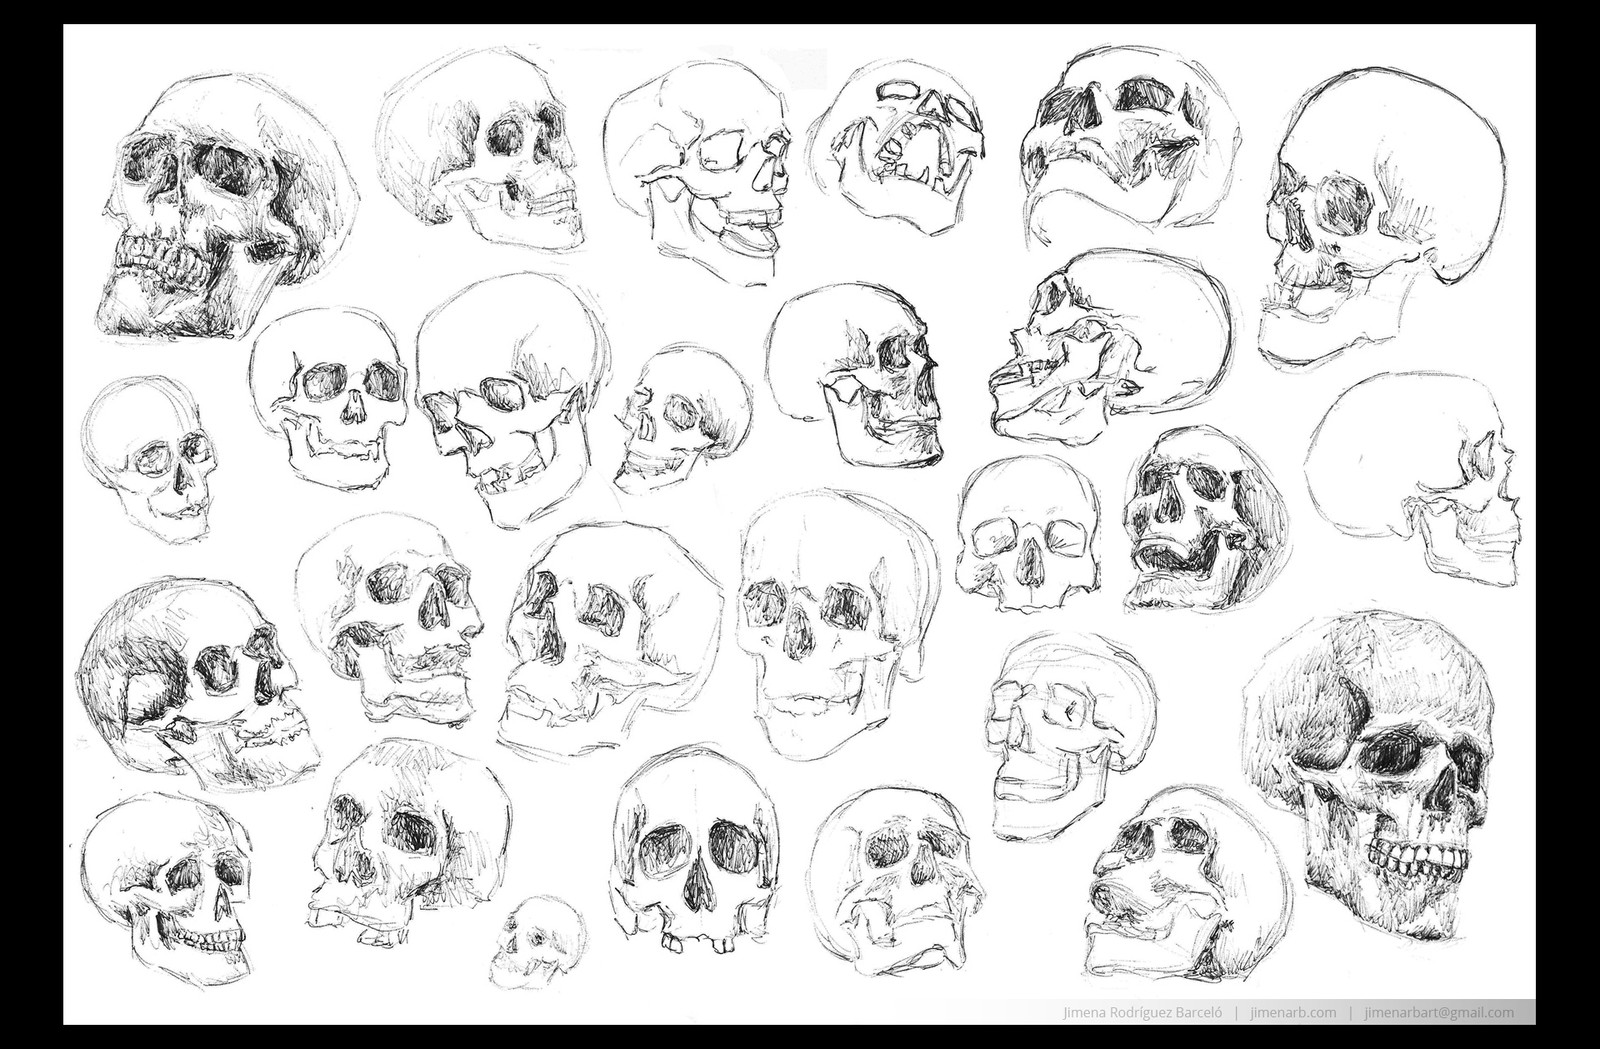 Sketches to practice anatomy and proportions of the skull with just a pen, paper, and references. Each skull takes approximately 2 to 10 minutes.